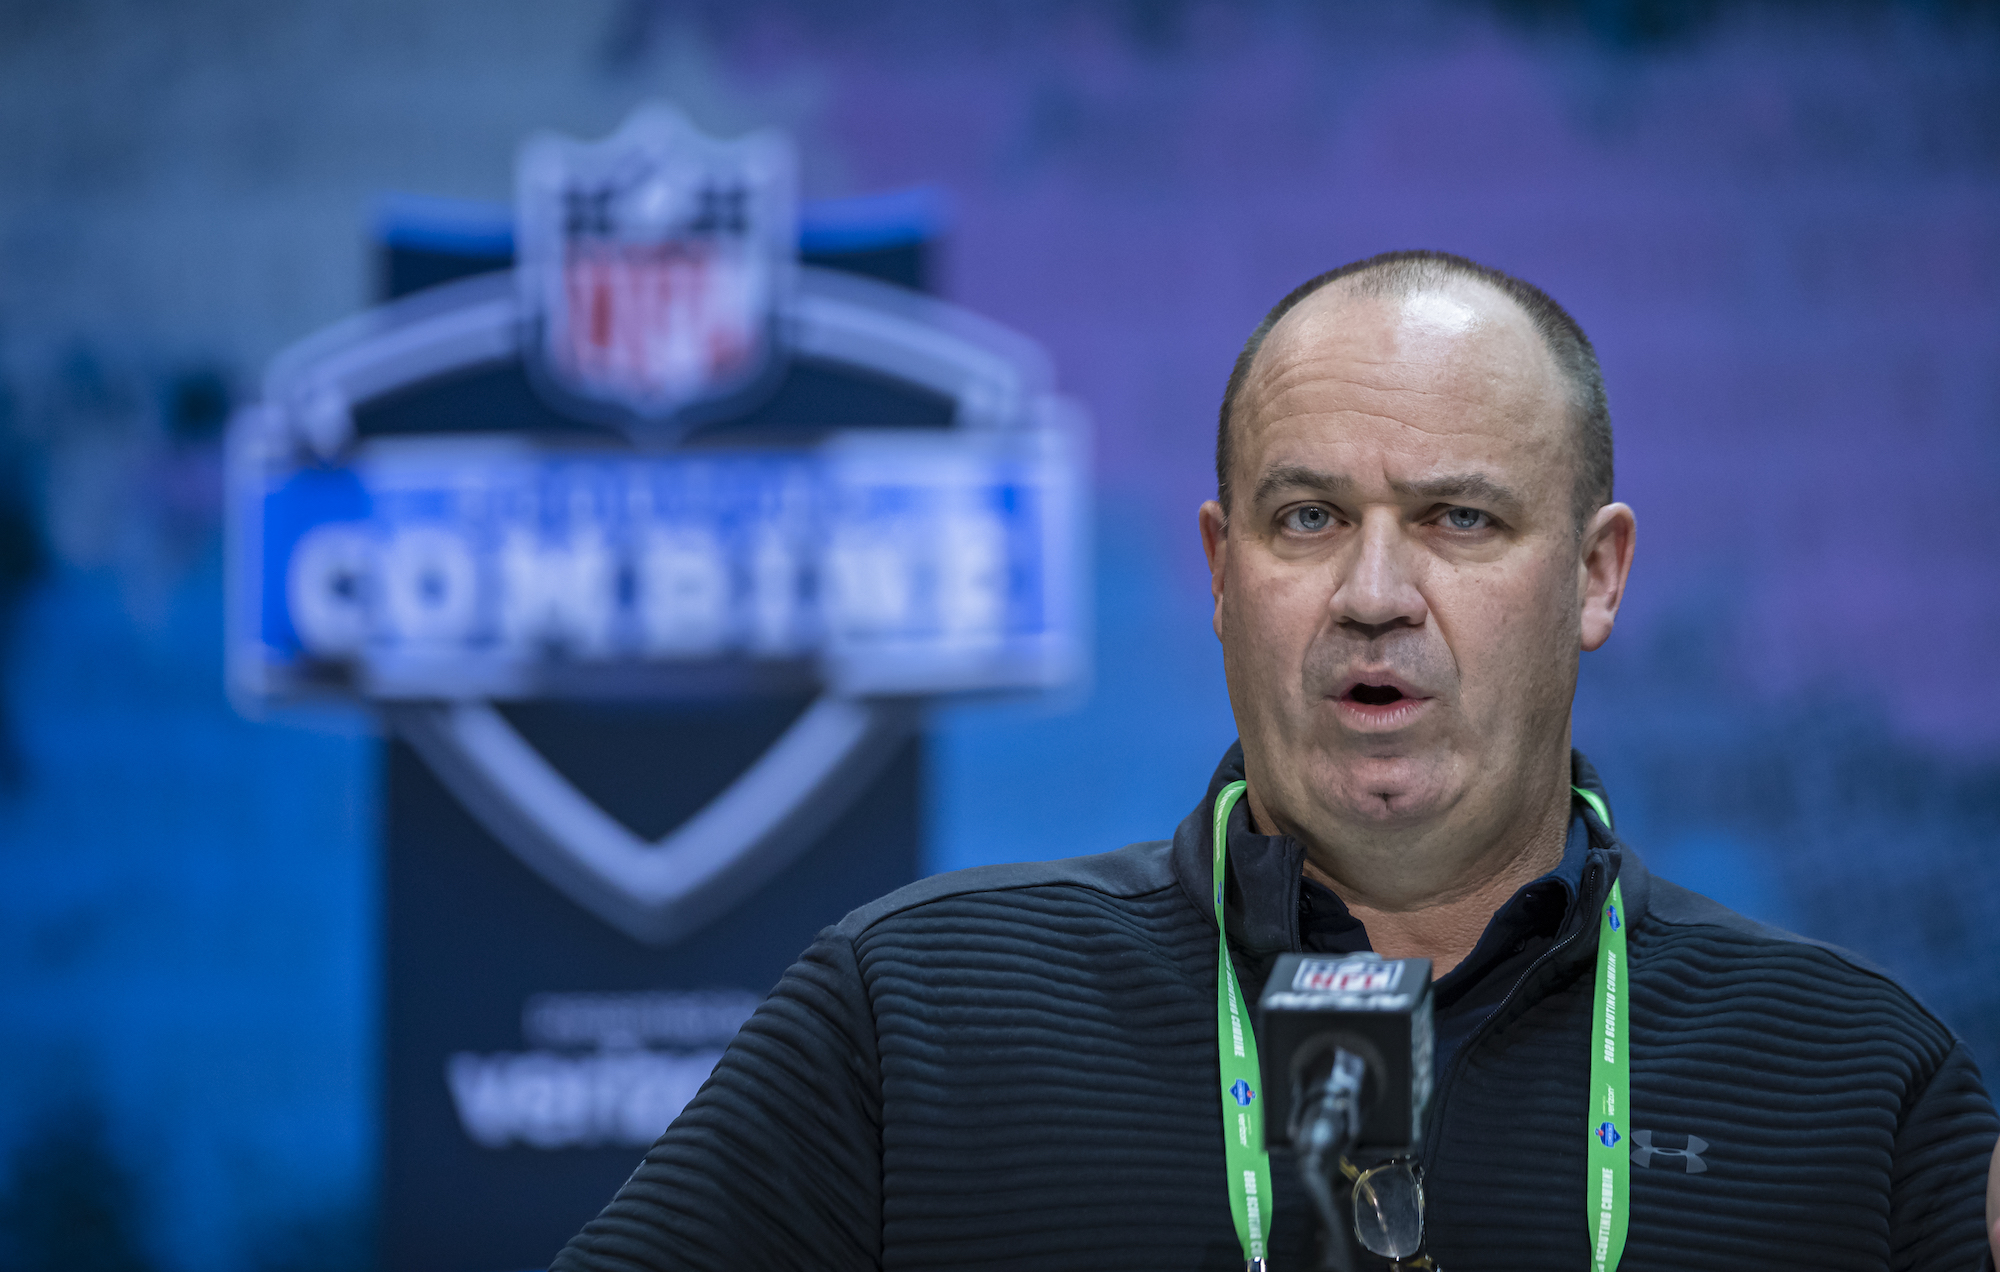 Head coach Bill OBrien of the Houston Texans speaks to the media at the Indiana Convention Center on February 25, 2020 in Indianapolis, Indiana.